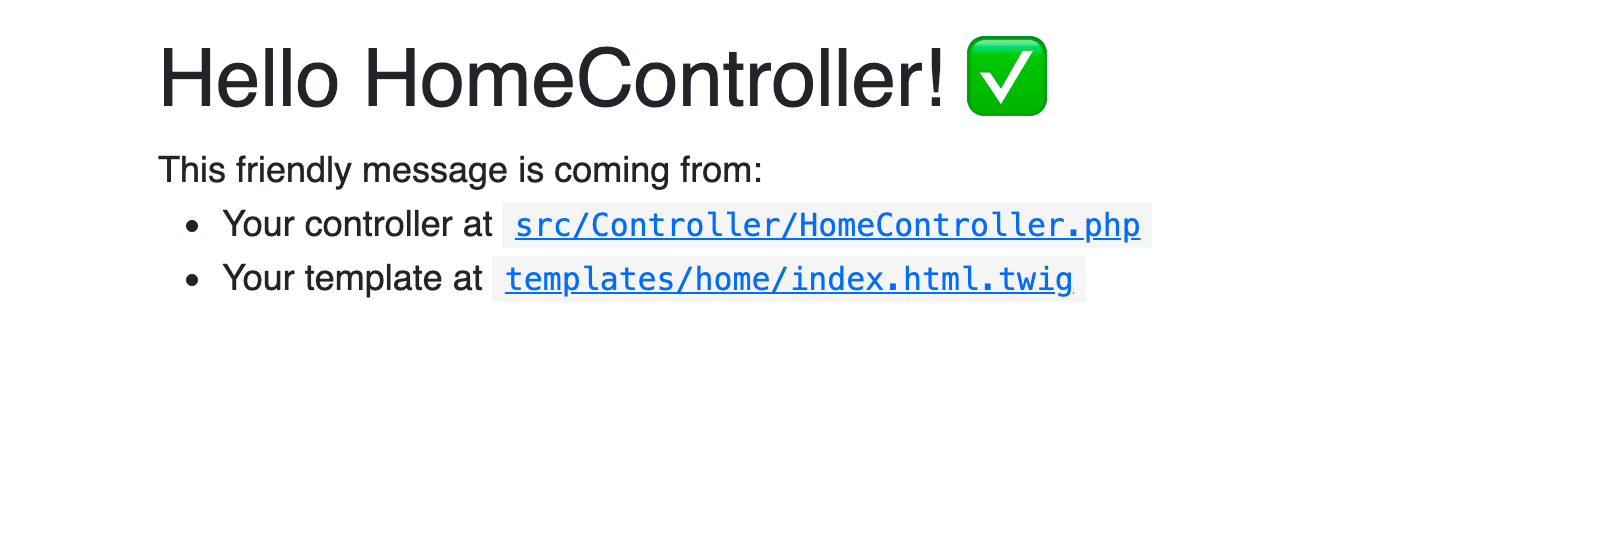 The default page for HomeController